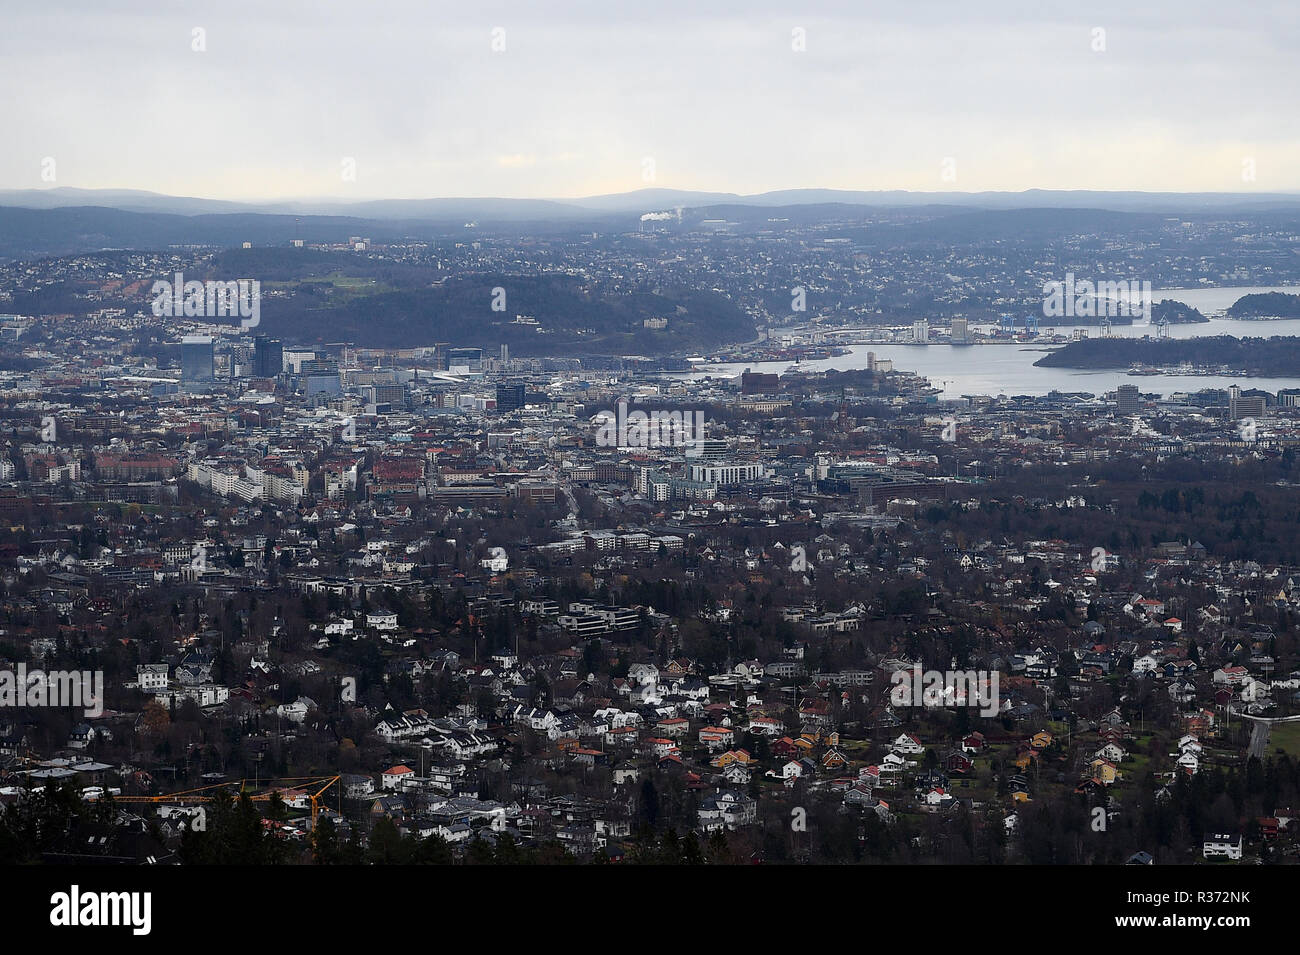 A view over the city of Oslo from the top of the Holmenkollen ski jump in Norway. Stock Photo